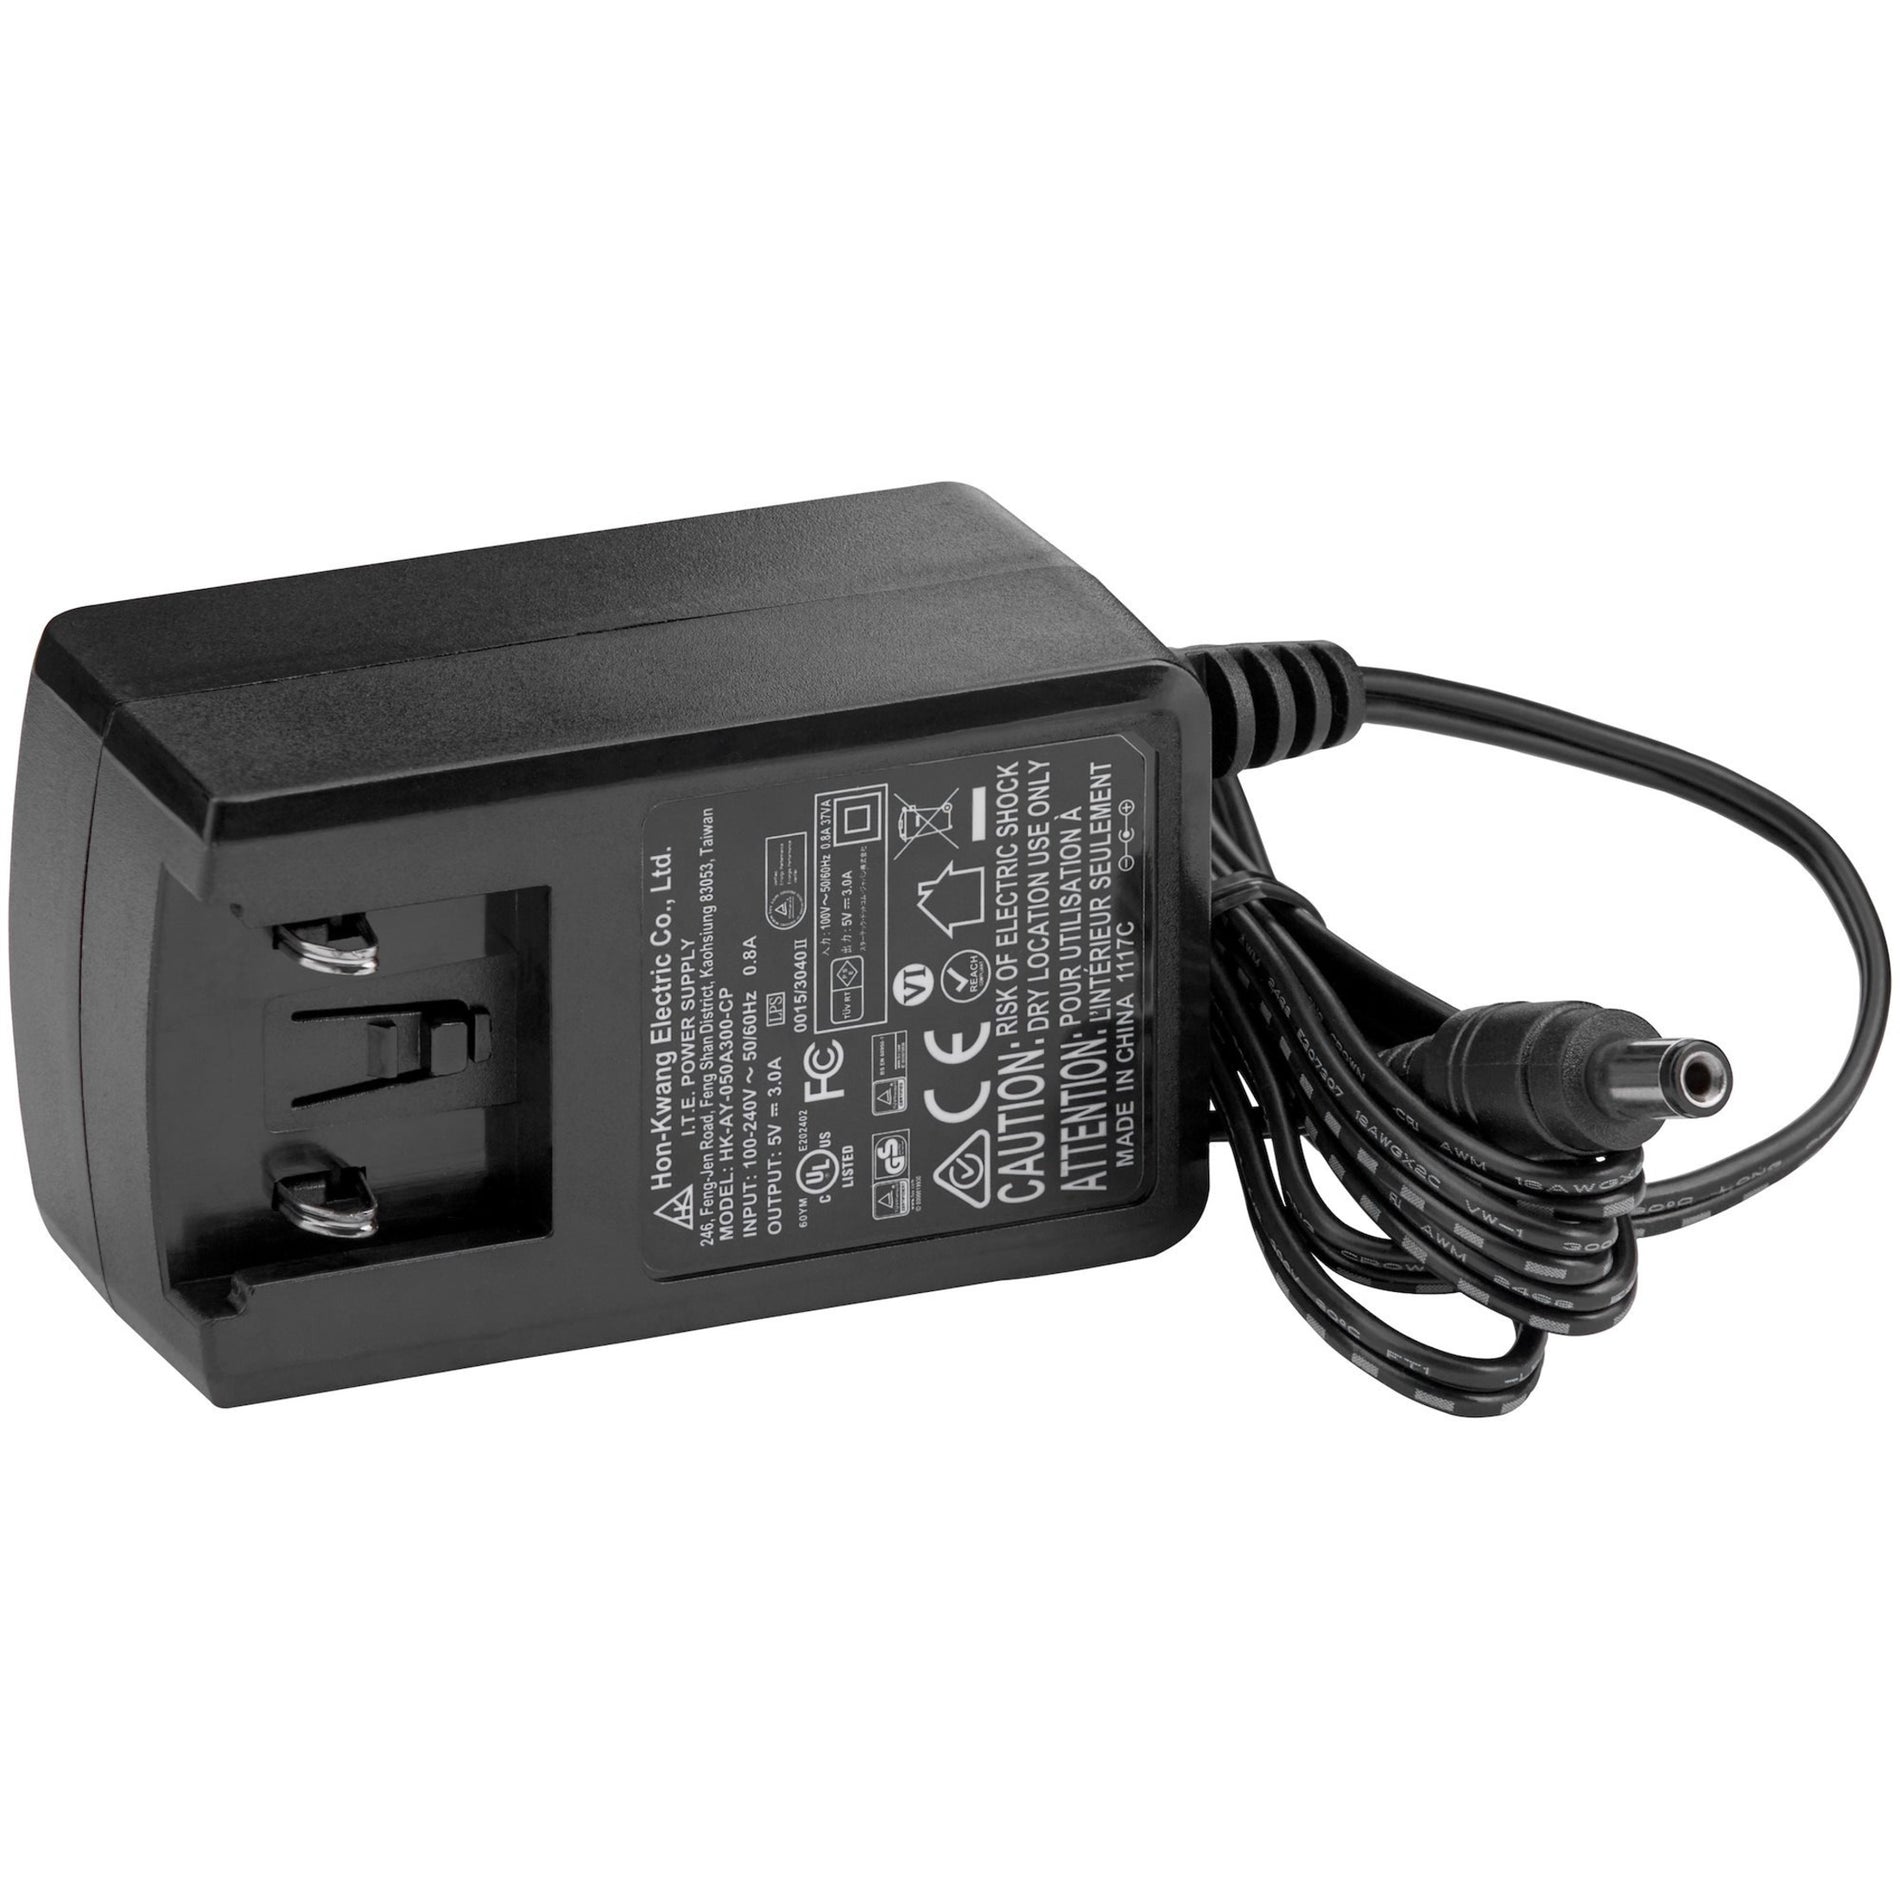 StarTech.com SVA5M3NEUA Replacement 5V DC Power Adapter - Compact and Reliable Power Supply for Your Devices